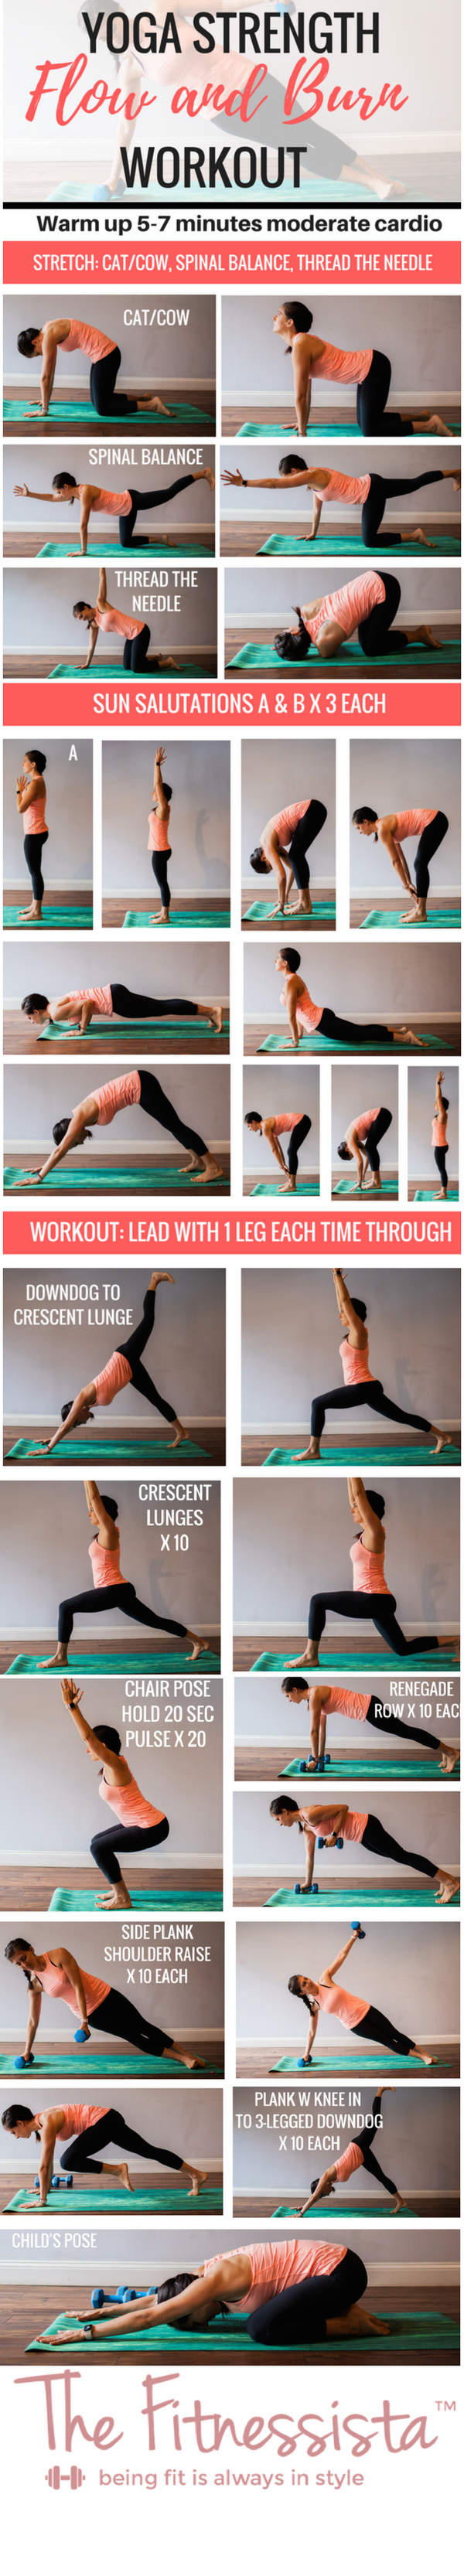 Yoga Power-based Strength Workout - The Fitnessista